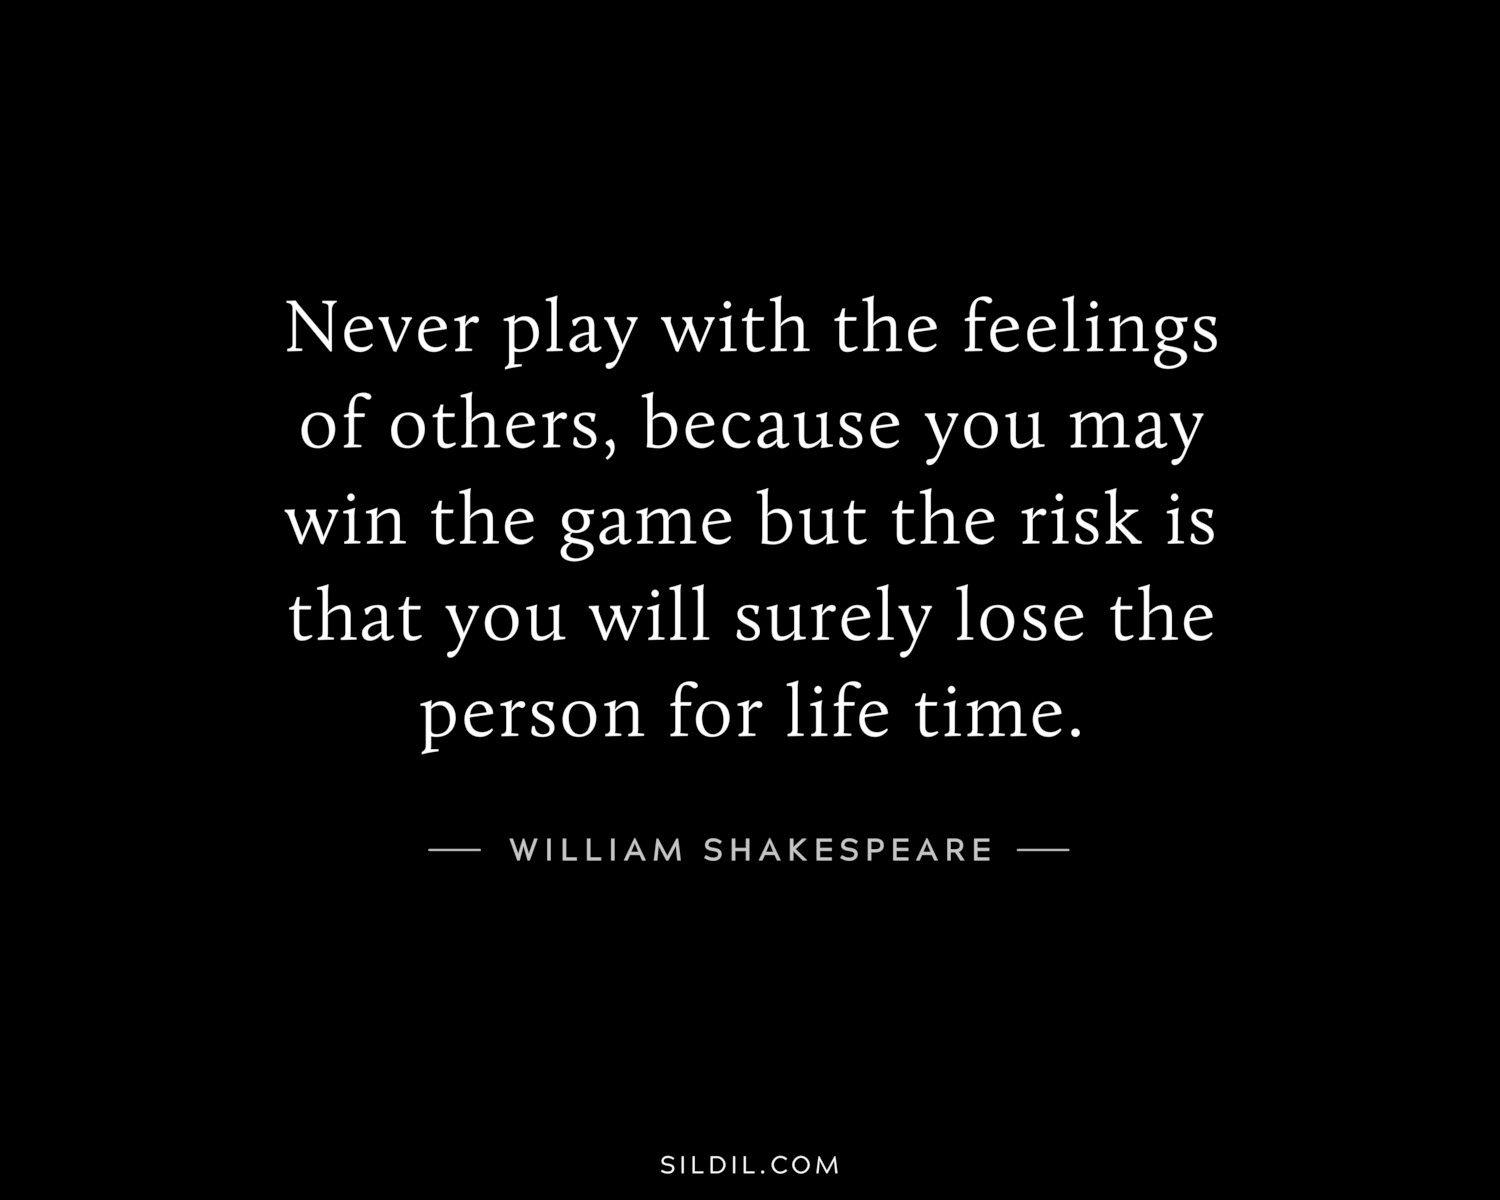 Never play with the feelings of others, because you may win the game but the risk is that you will surely lose the person for life time.